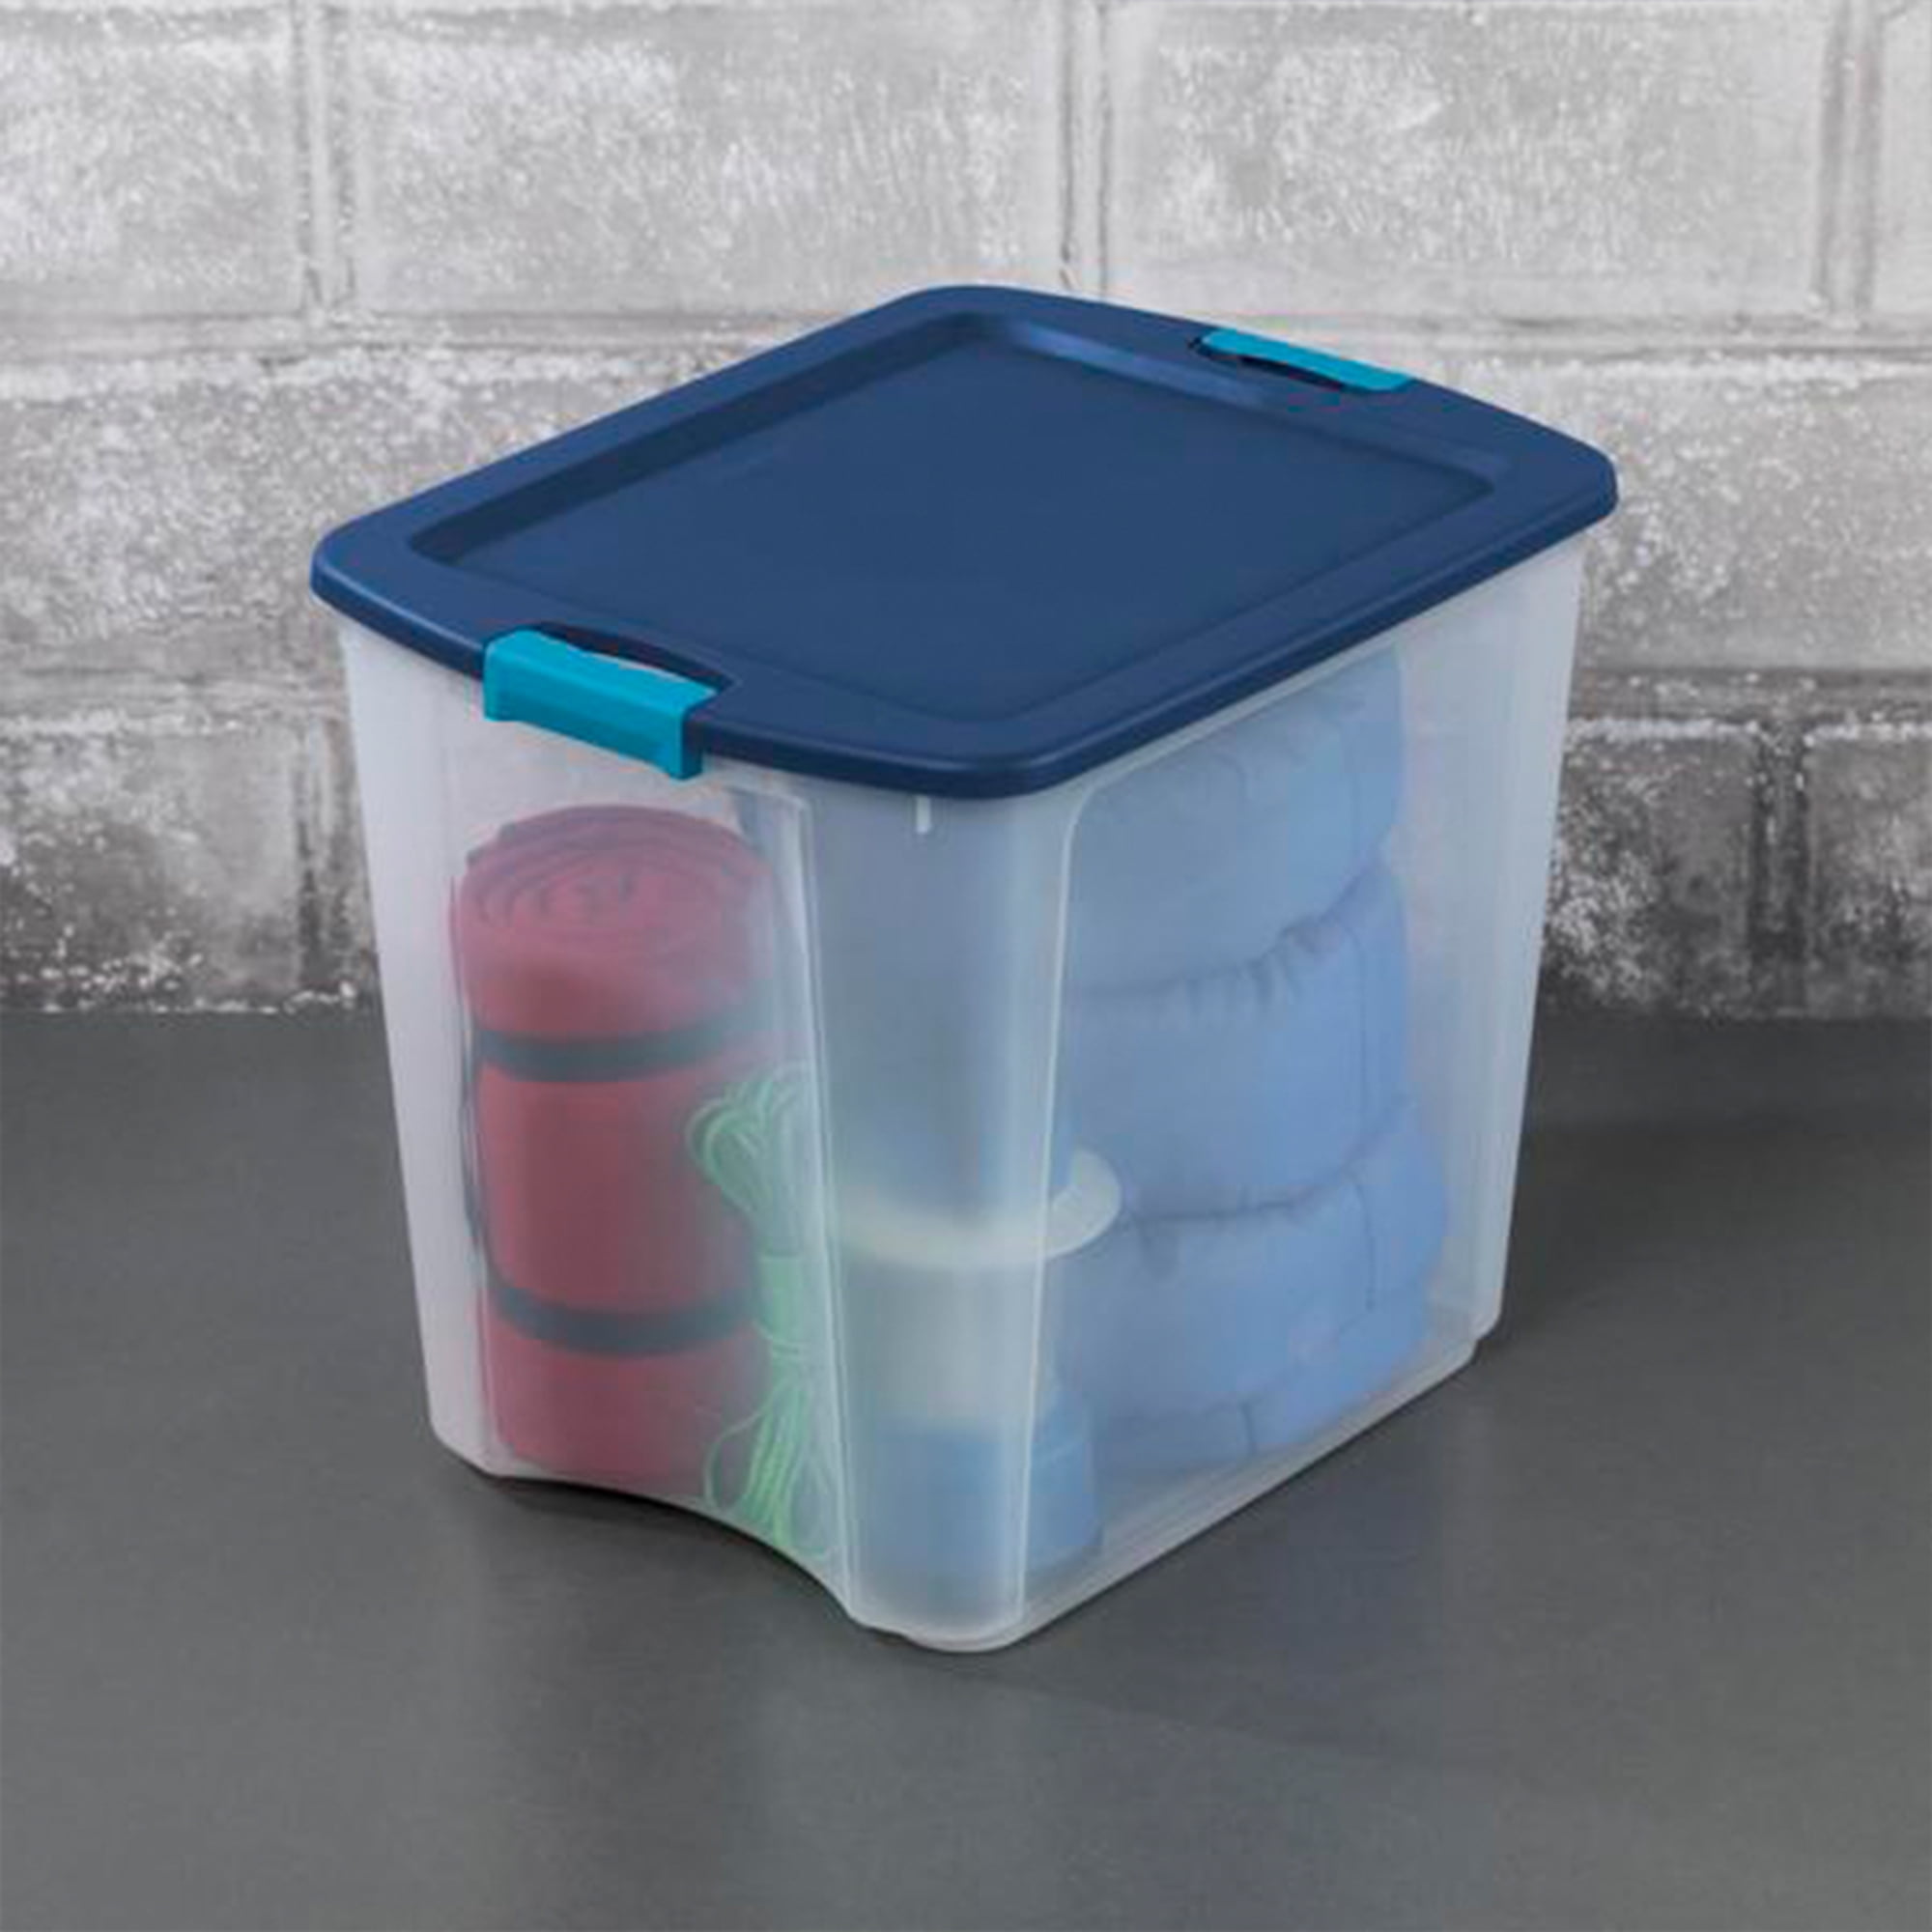 Sterilite Plastic Medium Clip Storage Box Container with Latching Lid, 12  Pack, 12pk - Pick 'n Save